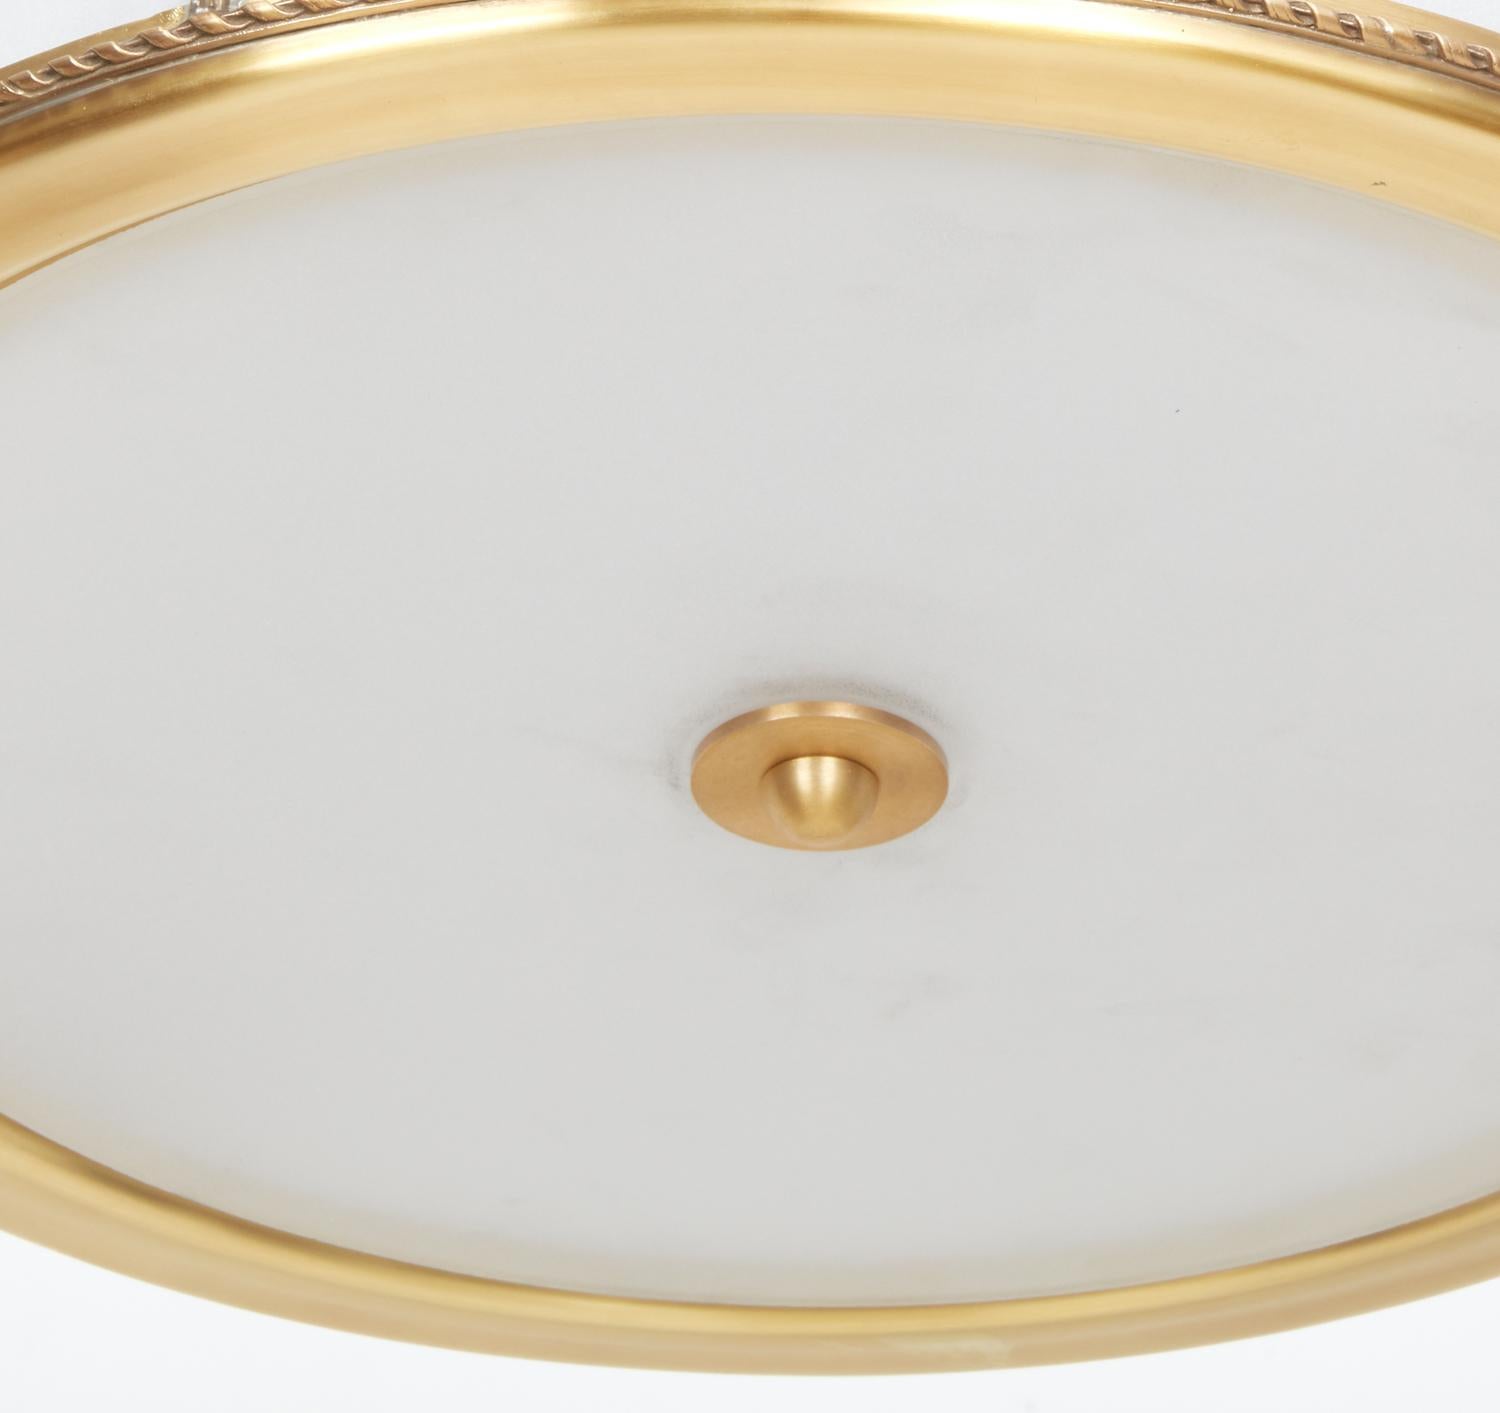 The Victoire flush mount in brass, designed by David Duncan. The round frame having curved, low iron glass in three sections, separated by rectangular sections with beveled edges under hand carved rock crystal rosette ornaments. Four Edison sockets